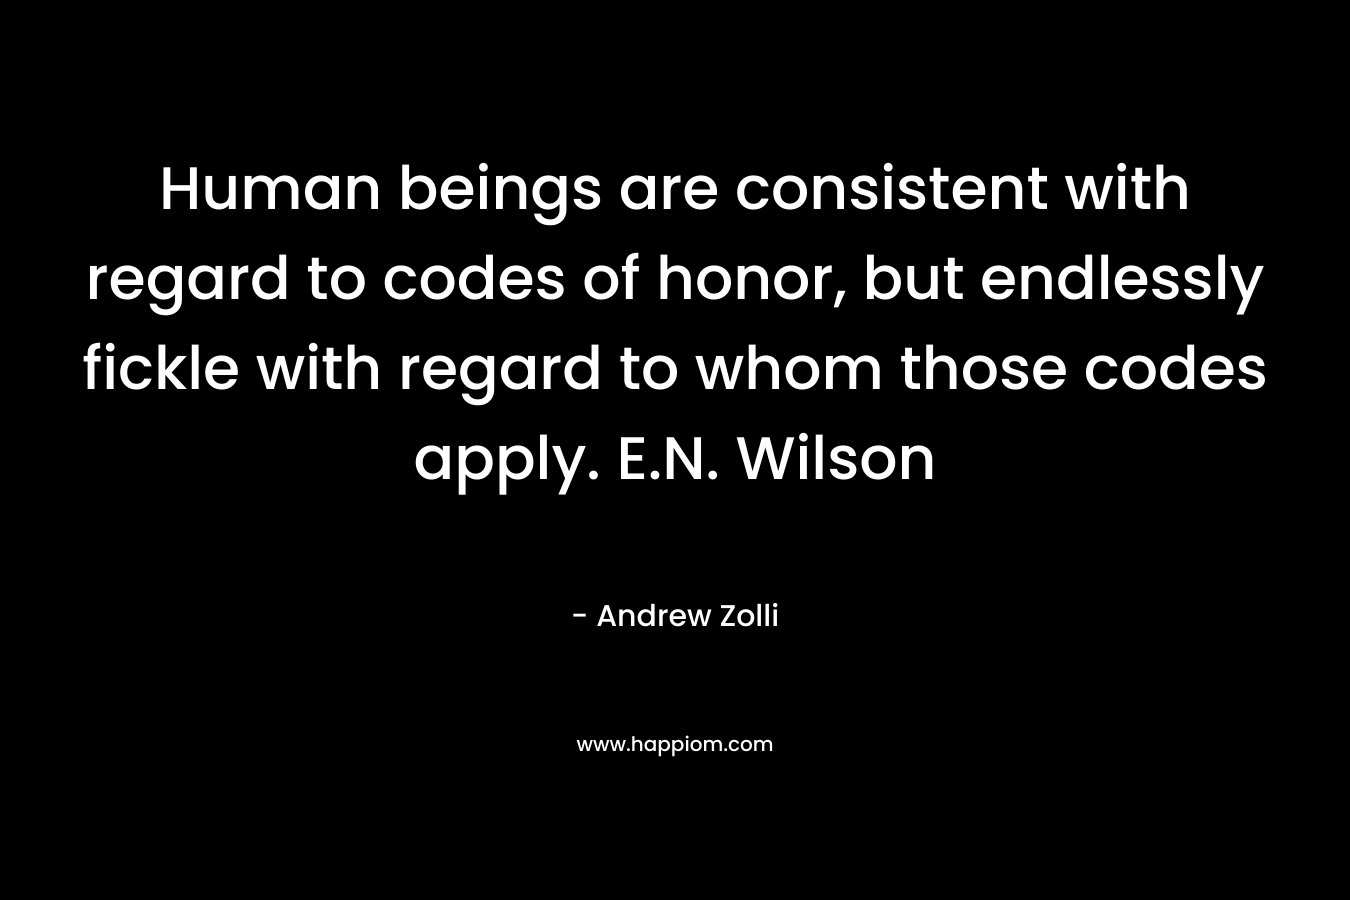 Human beings are consistent with regard to codes of honor, but endlessly fickle with regard to whom those codes apply. E.N. Wilson